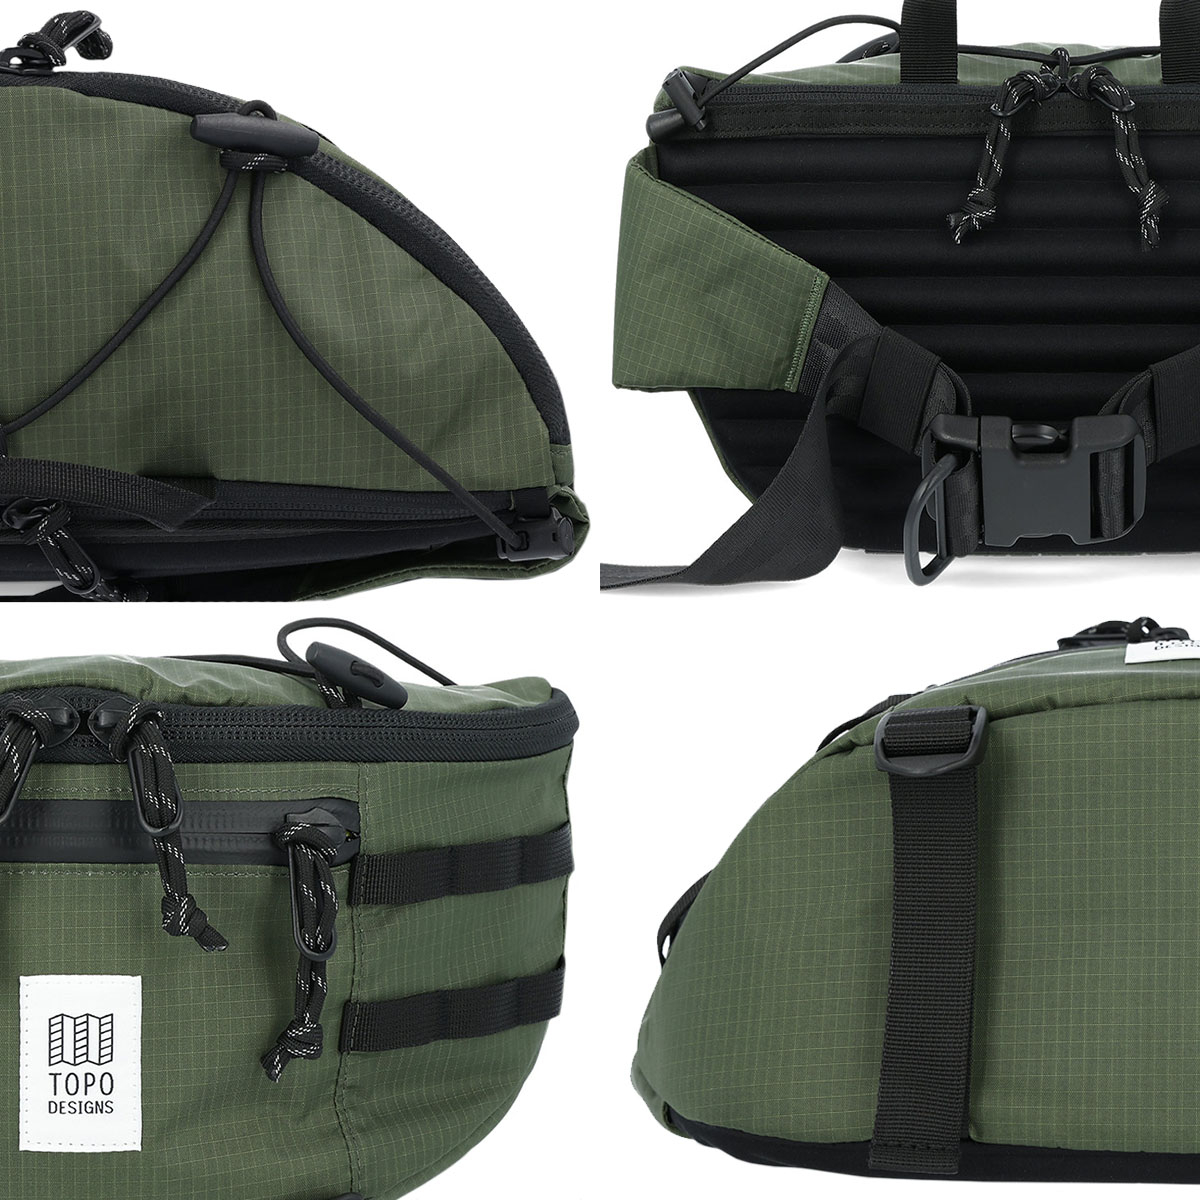 Topo Designs Mountain Sling Bag, carrying options